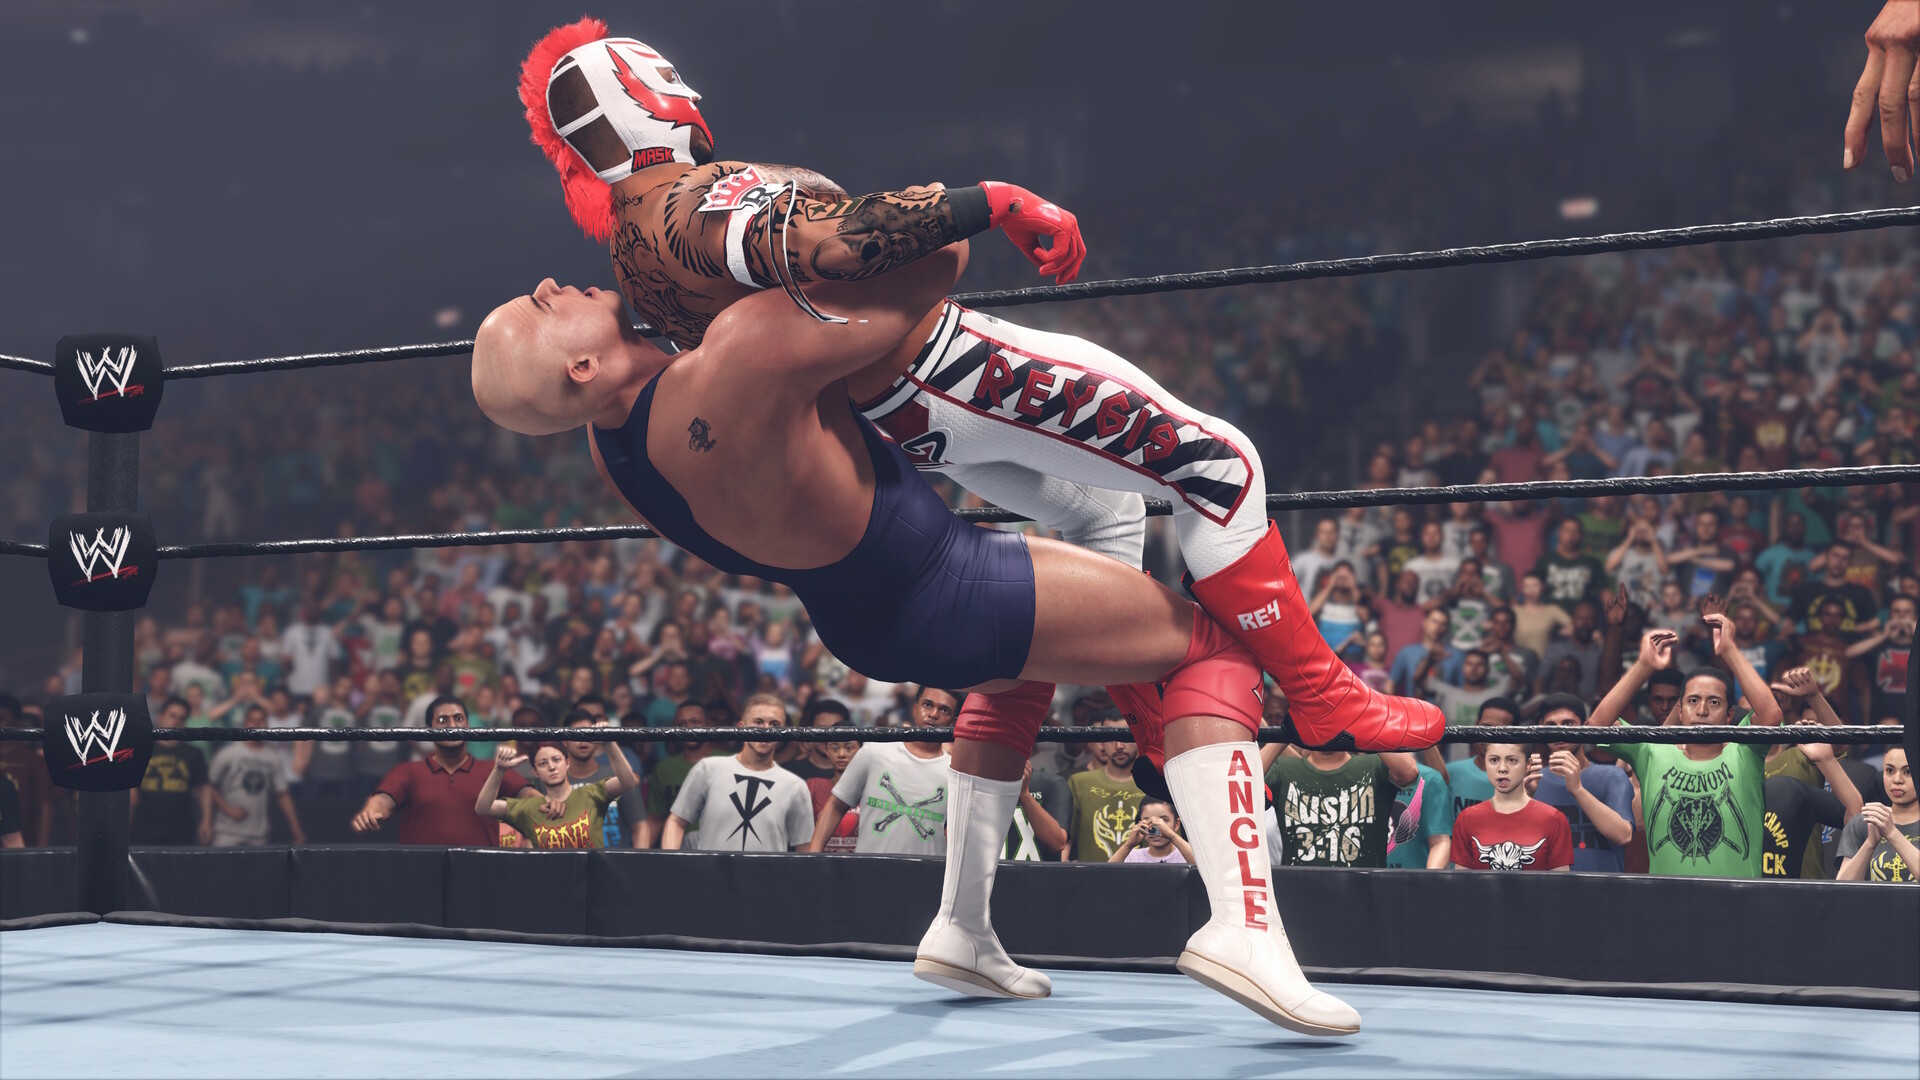 WWE 2K23 APK 1.0 Download Game Android Latest Version